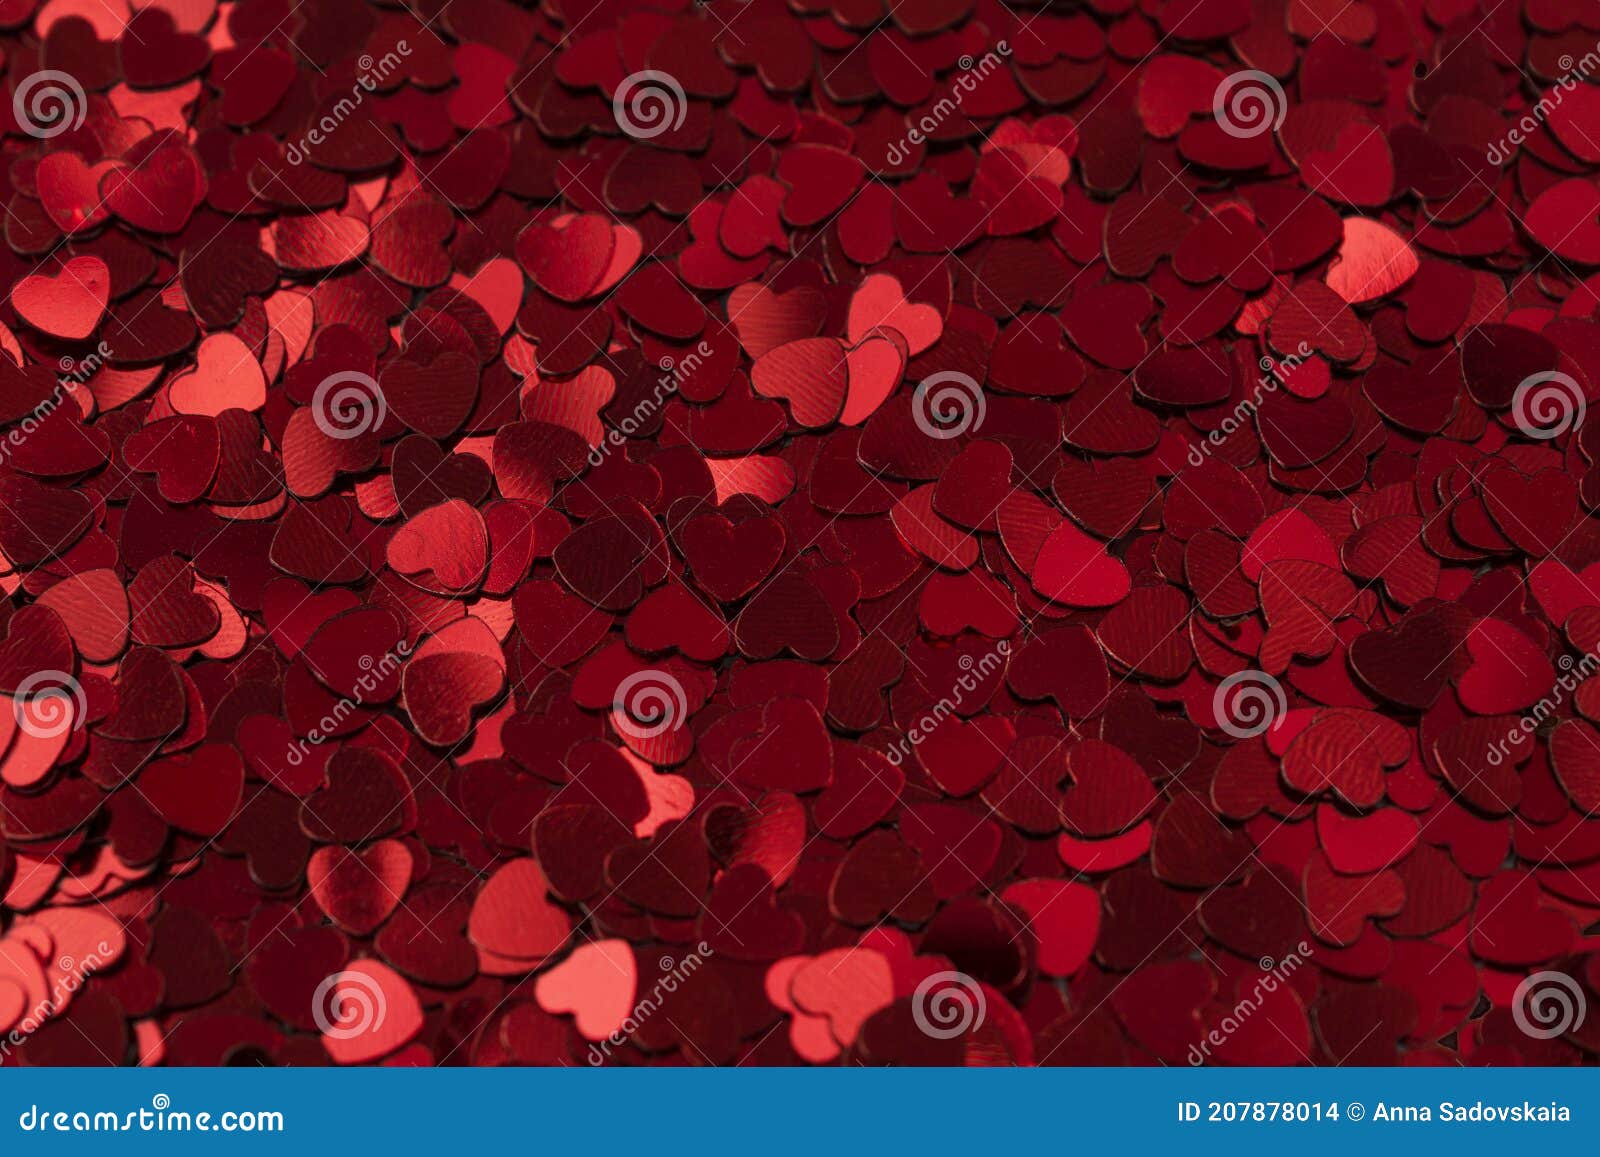 background made from little glittering heart confeti,